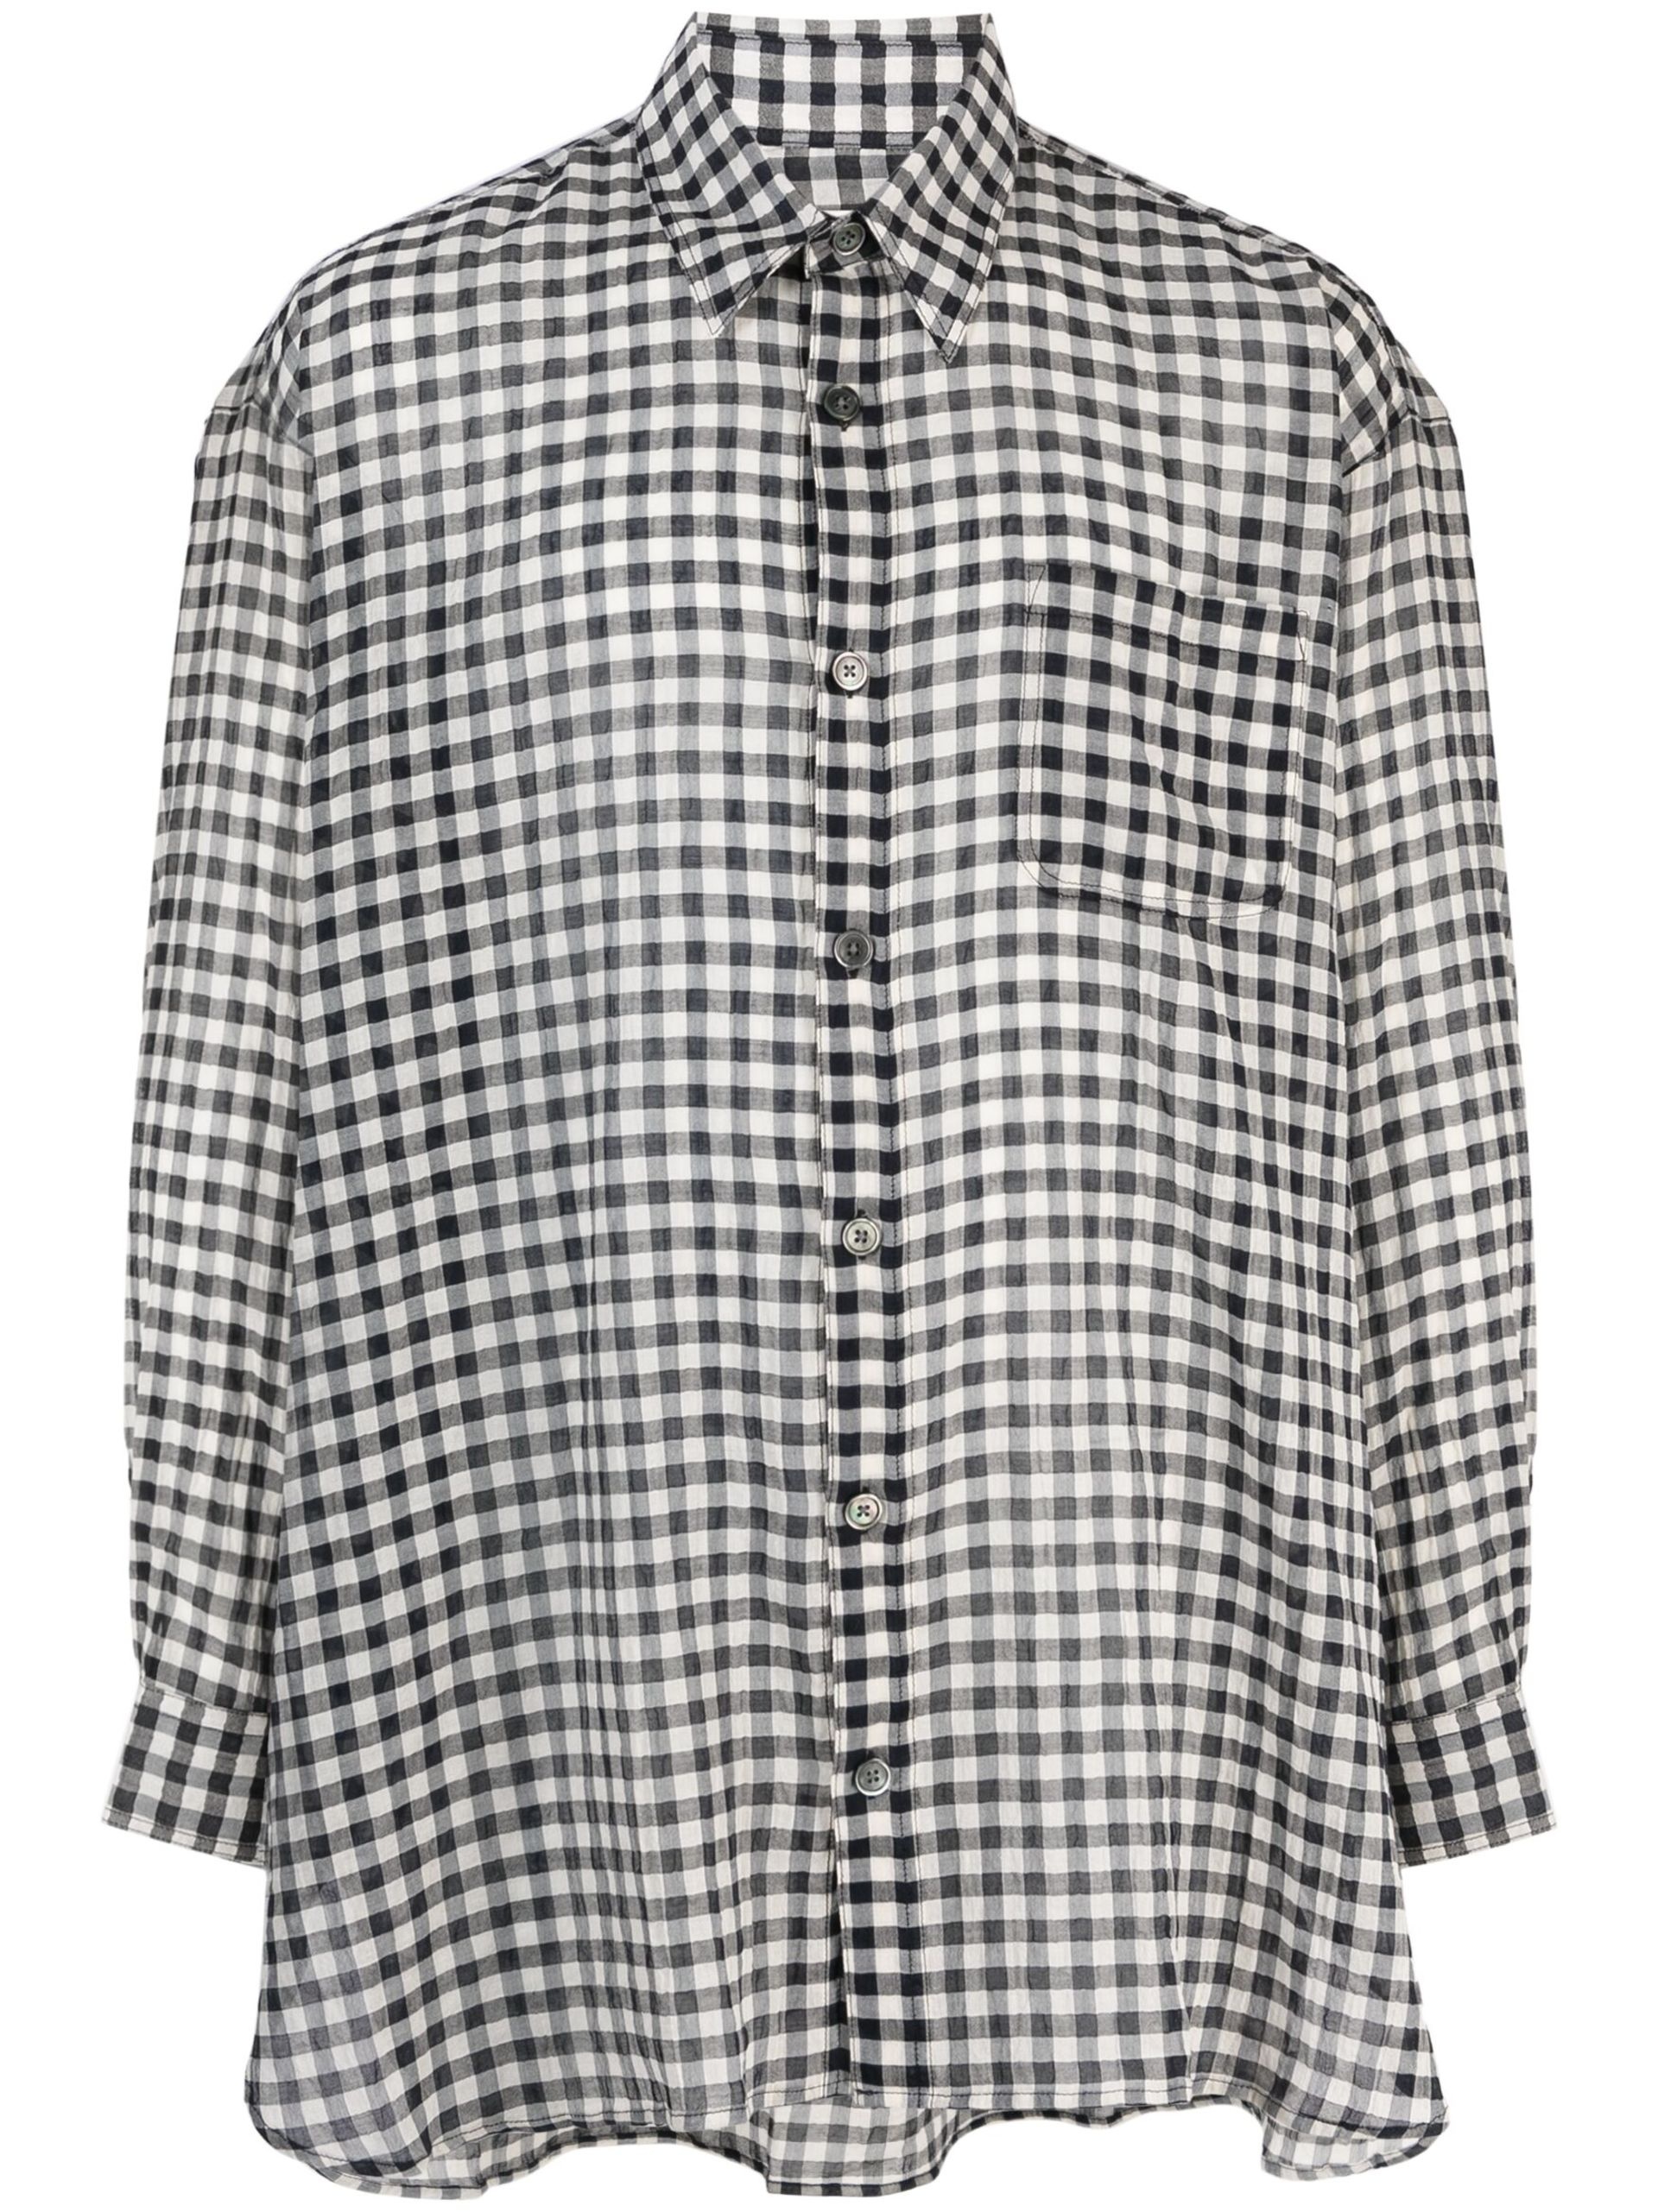 Black And White Darling Checked Cotton Shirt - 1